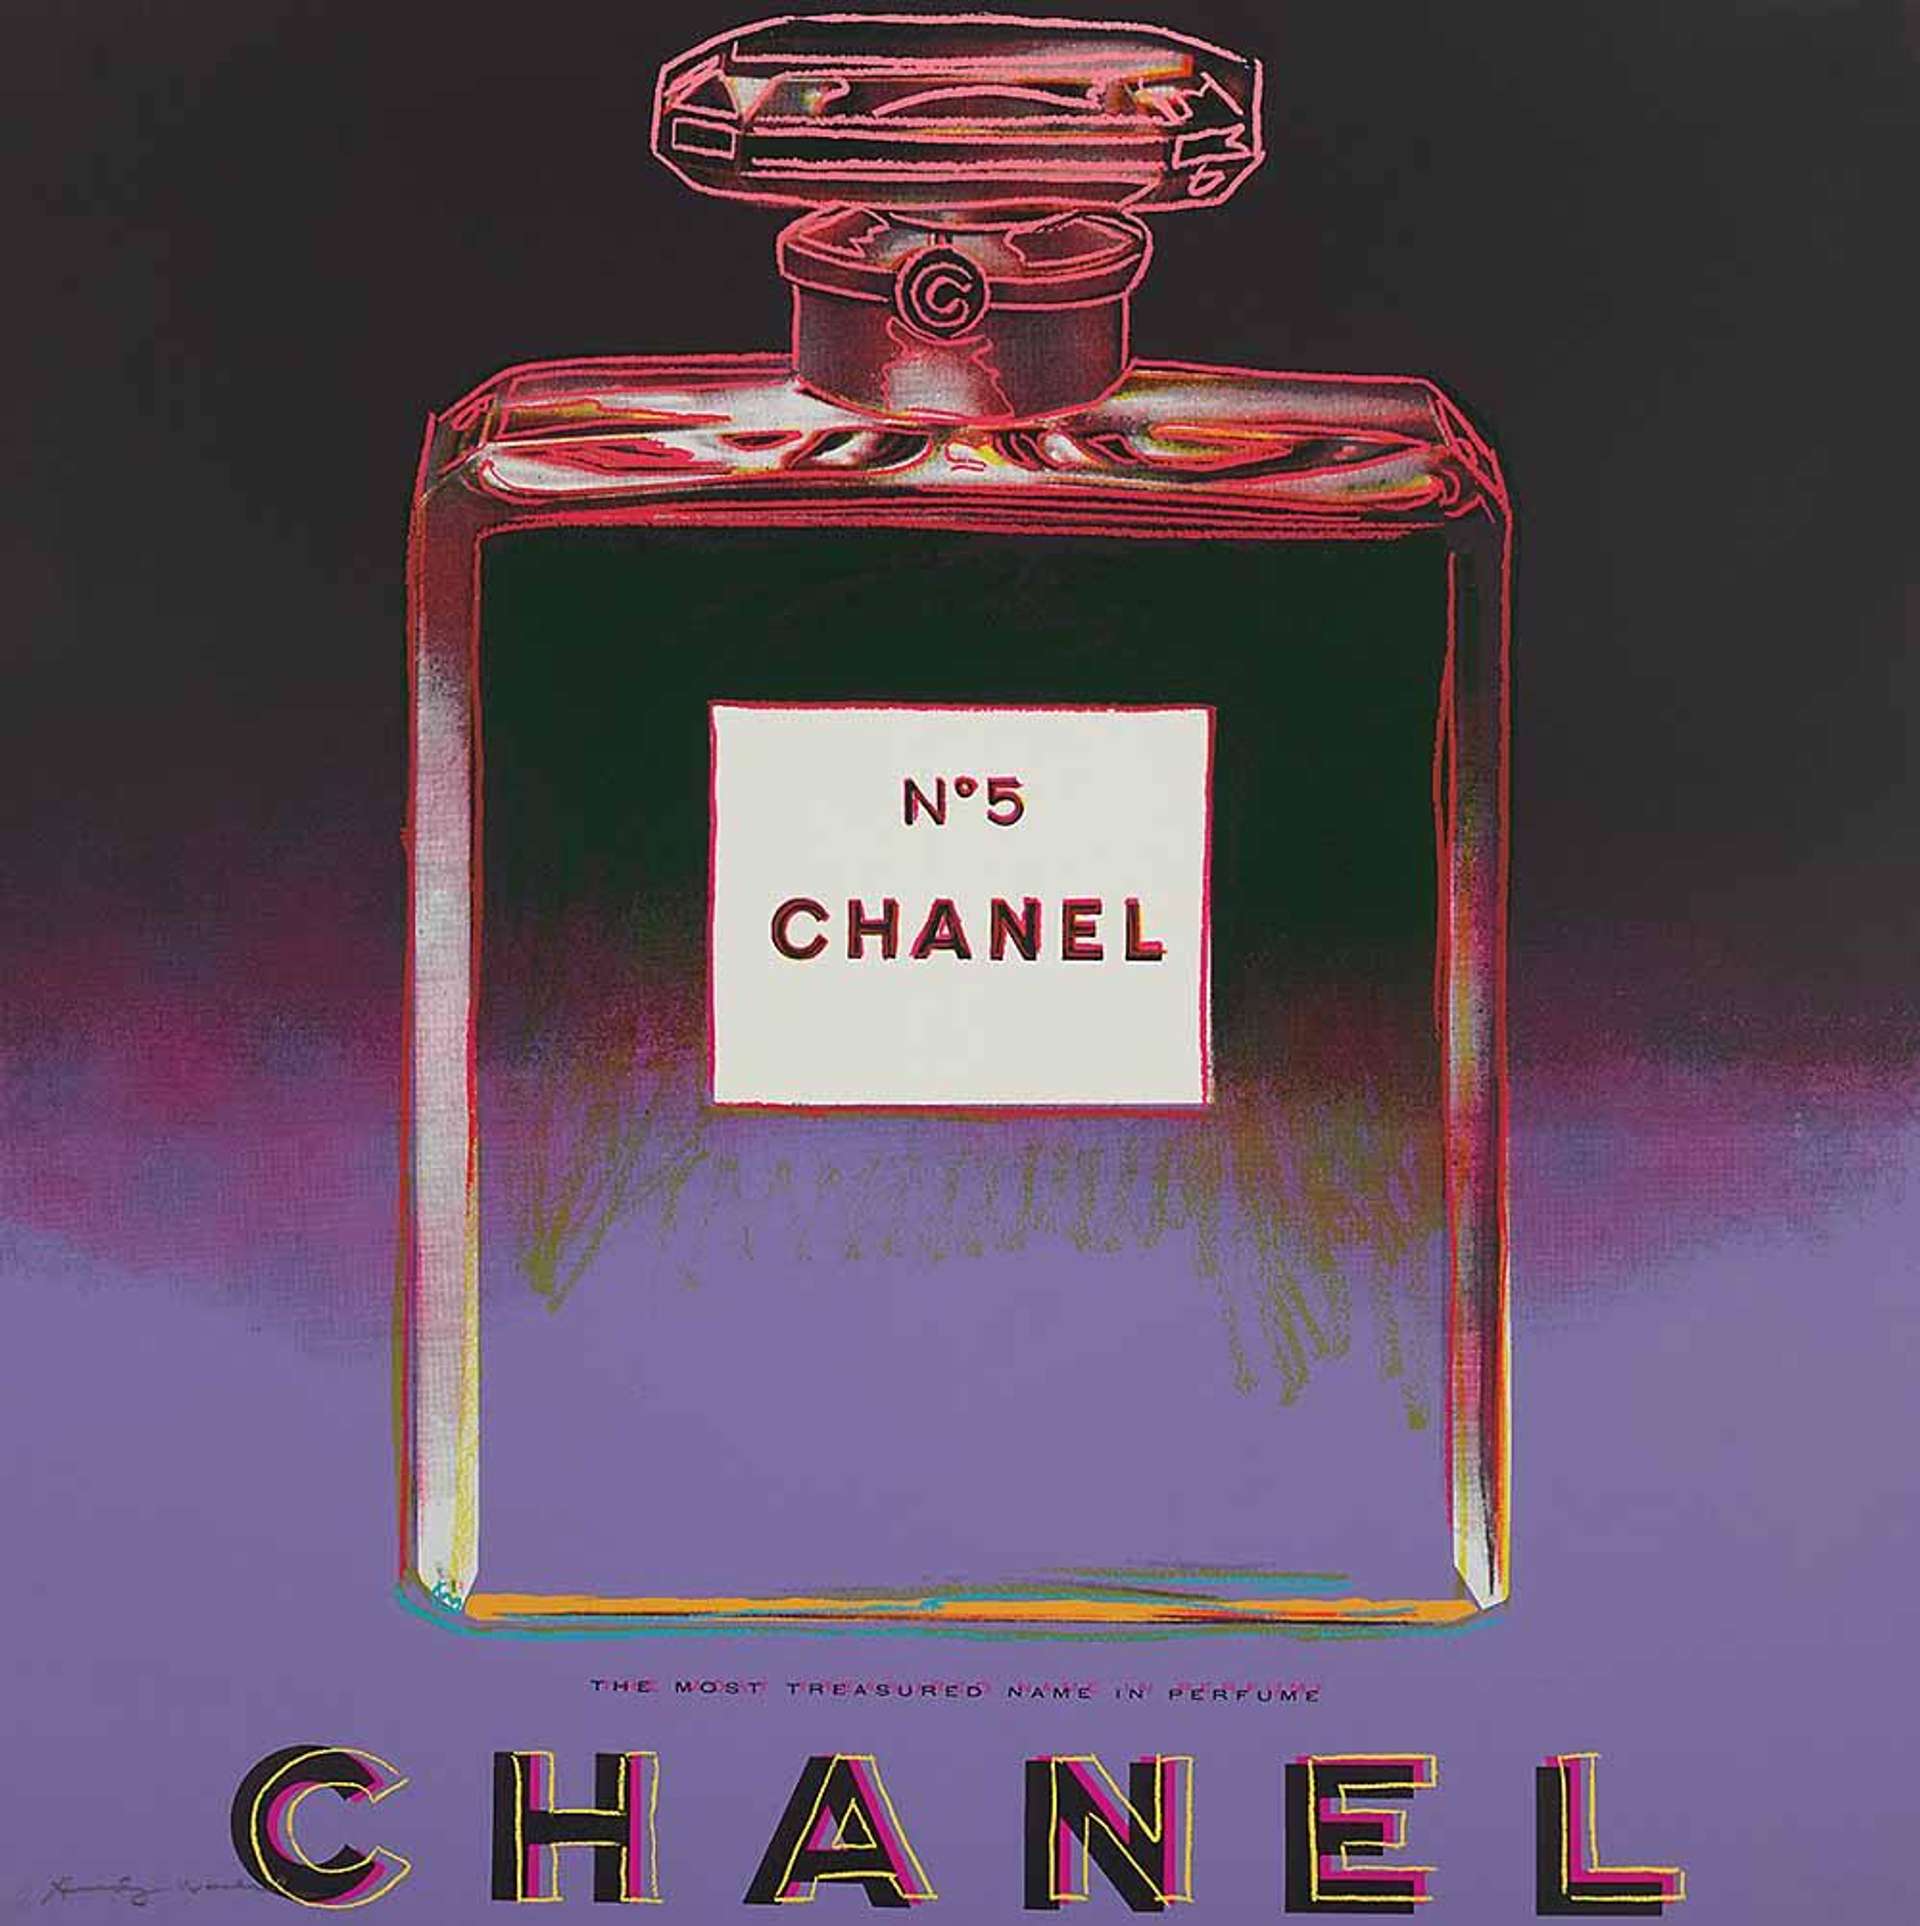 A Pop Art print by Andy Warhol depicting and advert image of a Chanel No. 5 bottle in purple and pink.